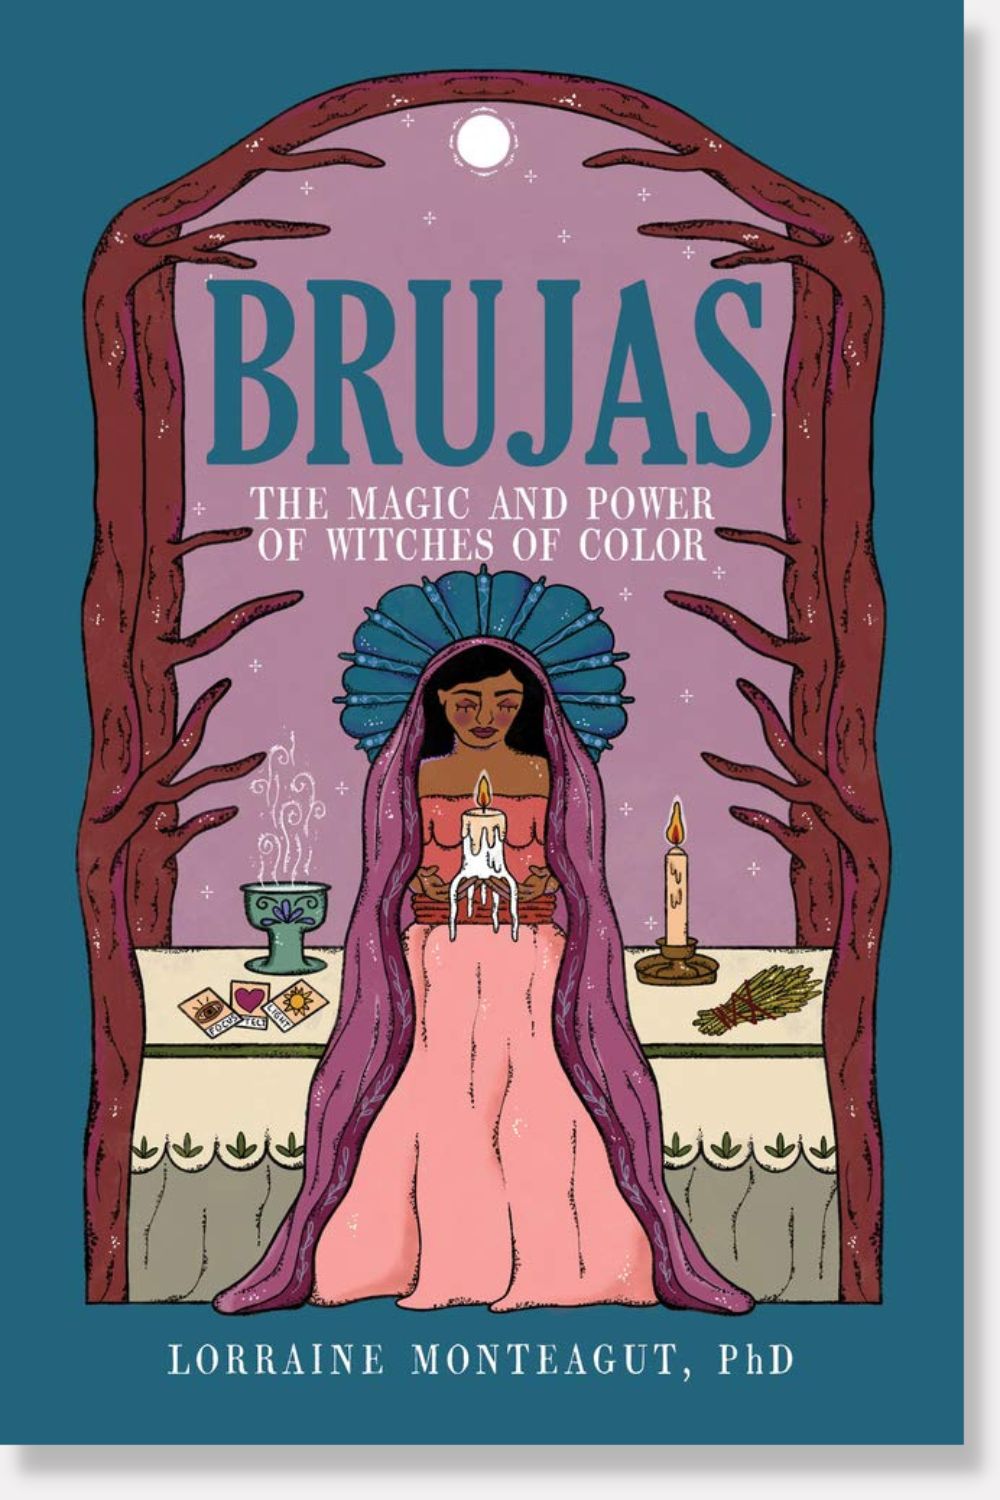 Brujas: The Magic and Power of Witches of Color by Lorraine Monteagut - book cover